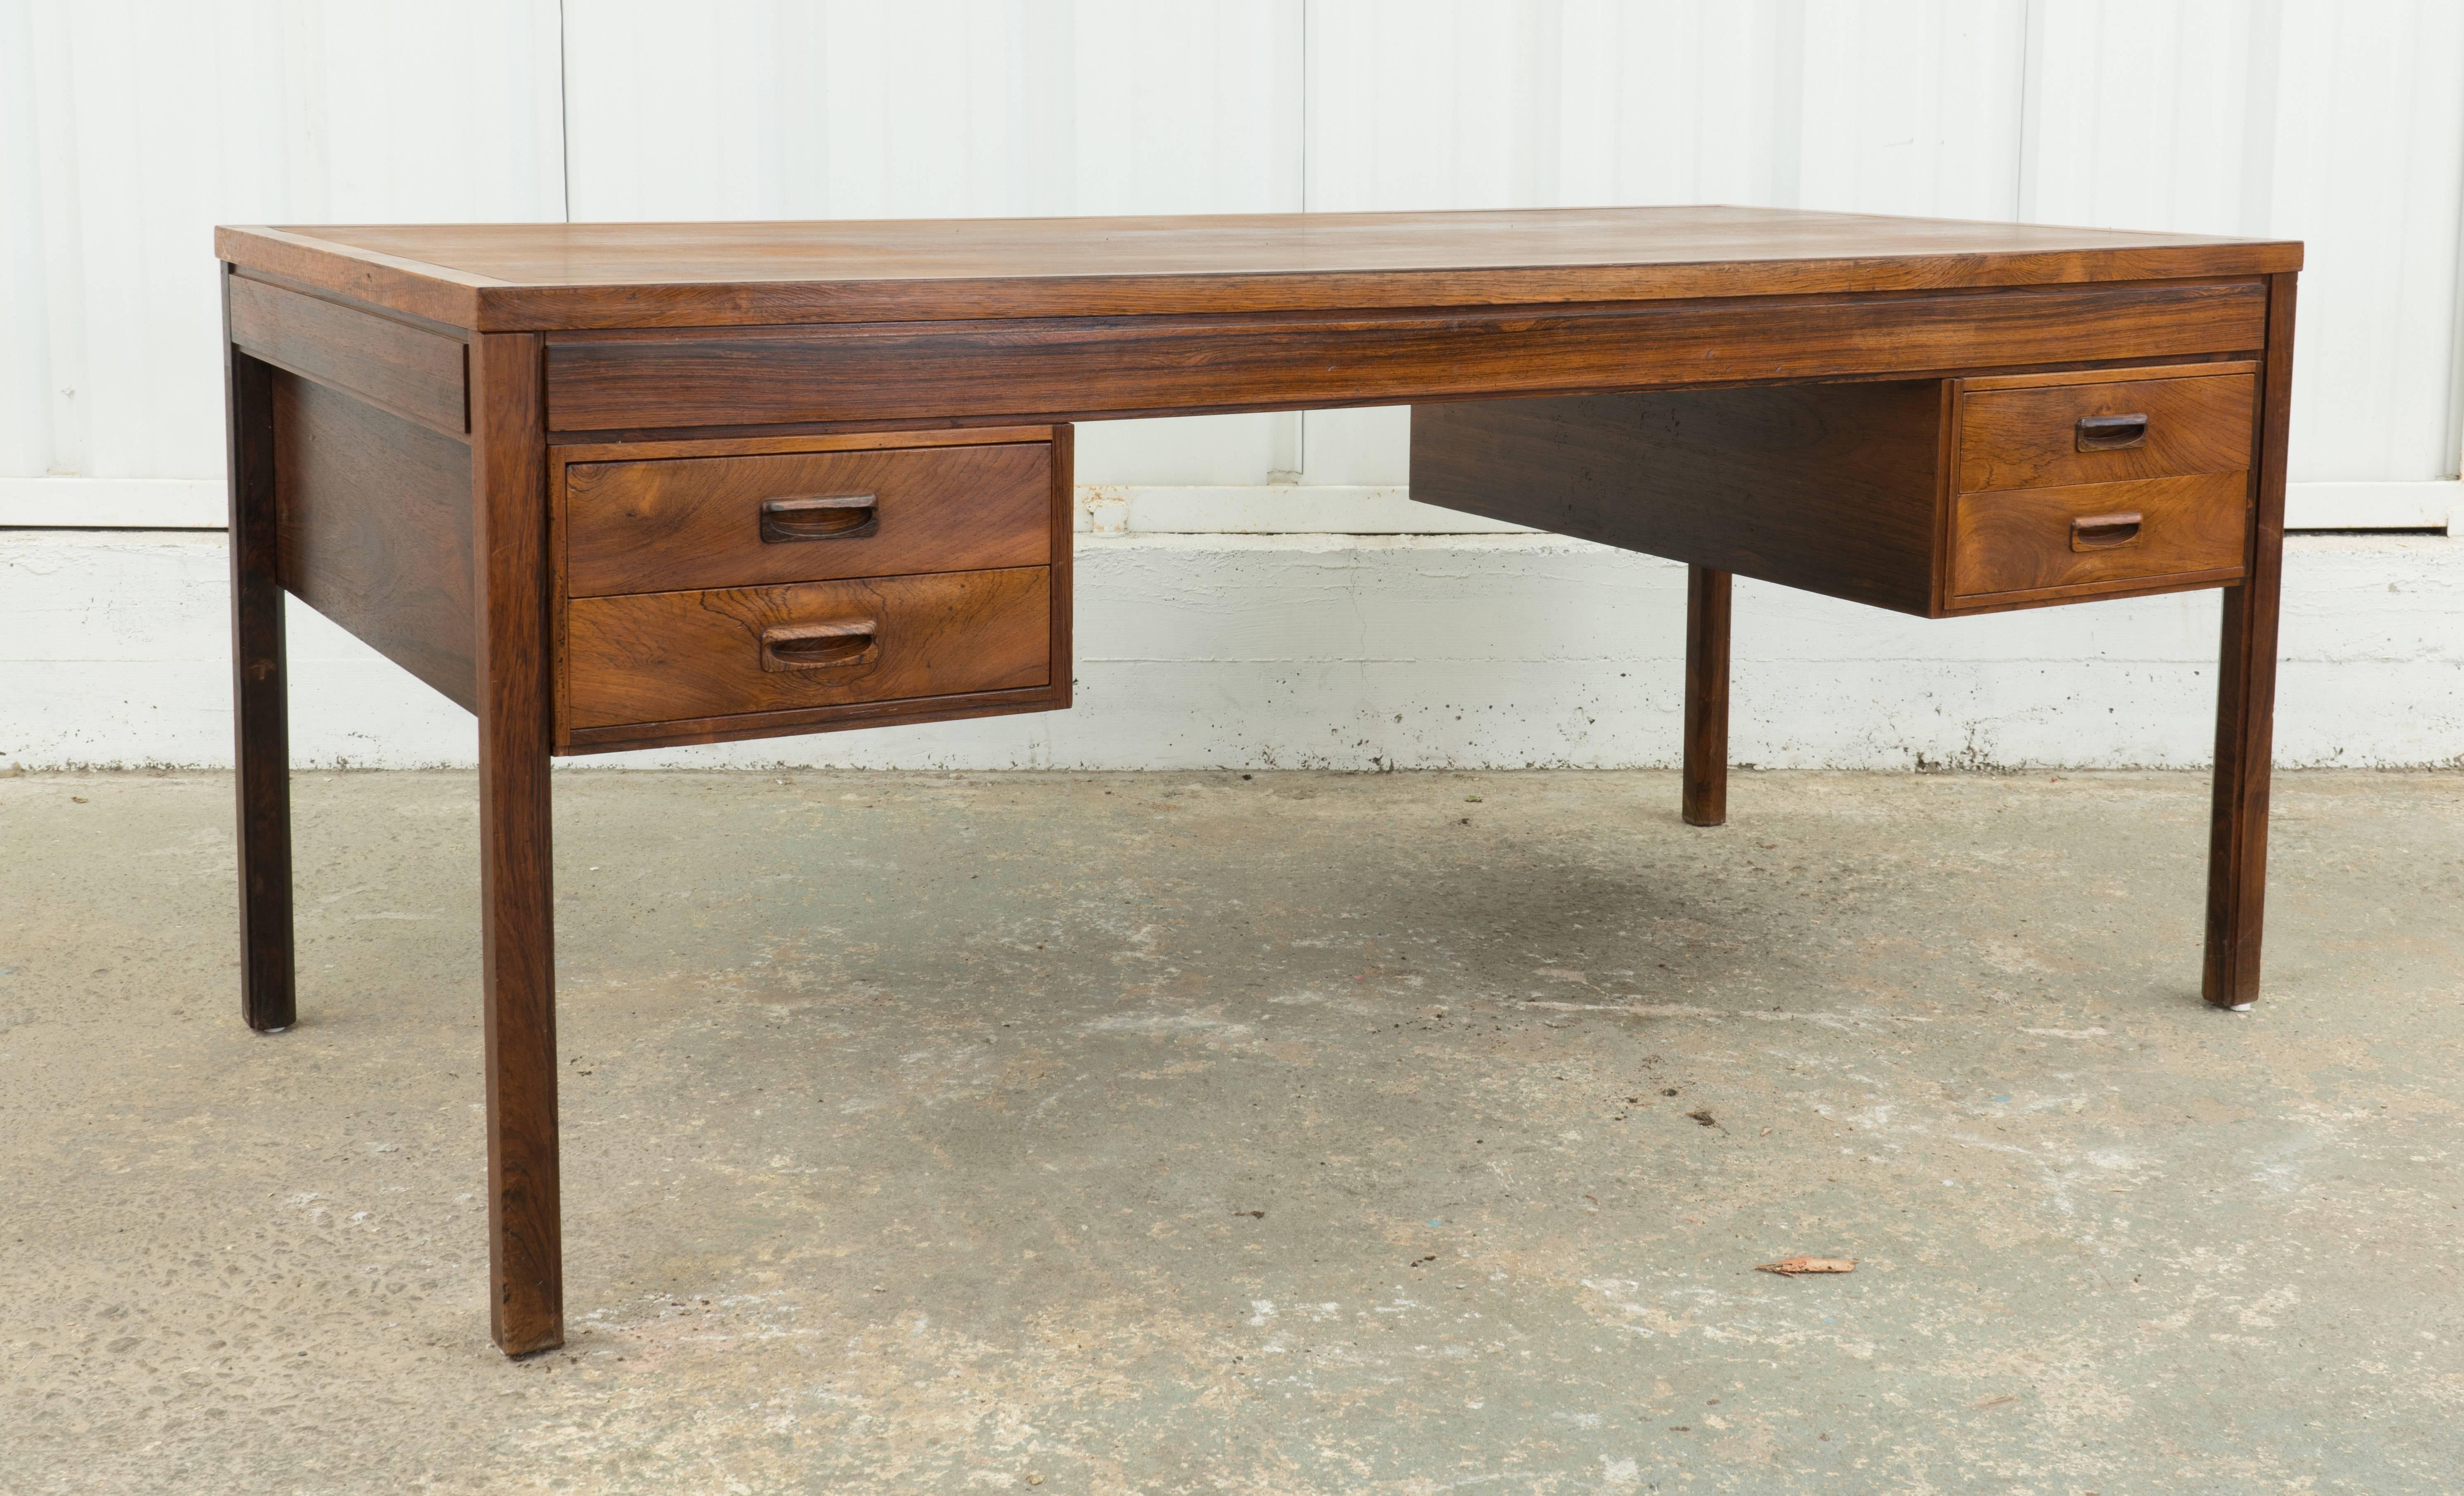 Gorgeous rosewood desk made in Denmark by Soren Willadsen. Finished from 360 degrees so can easily float in a room. Beautiful lines and wood! See all pics for craftsmanship details and manufacturer notation.